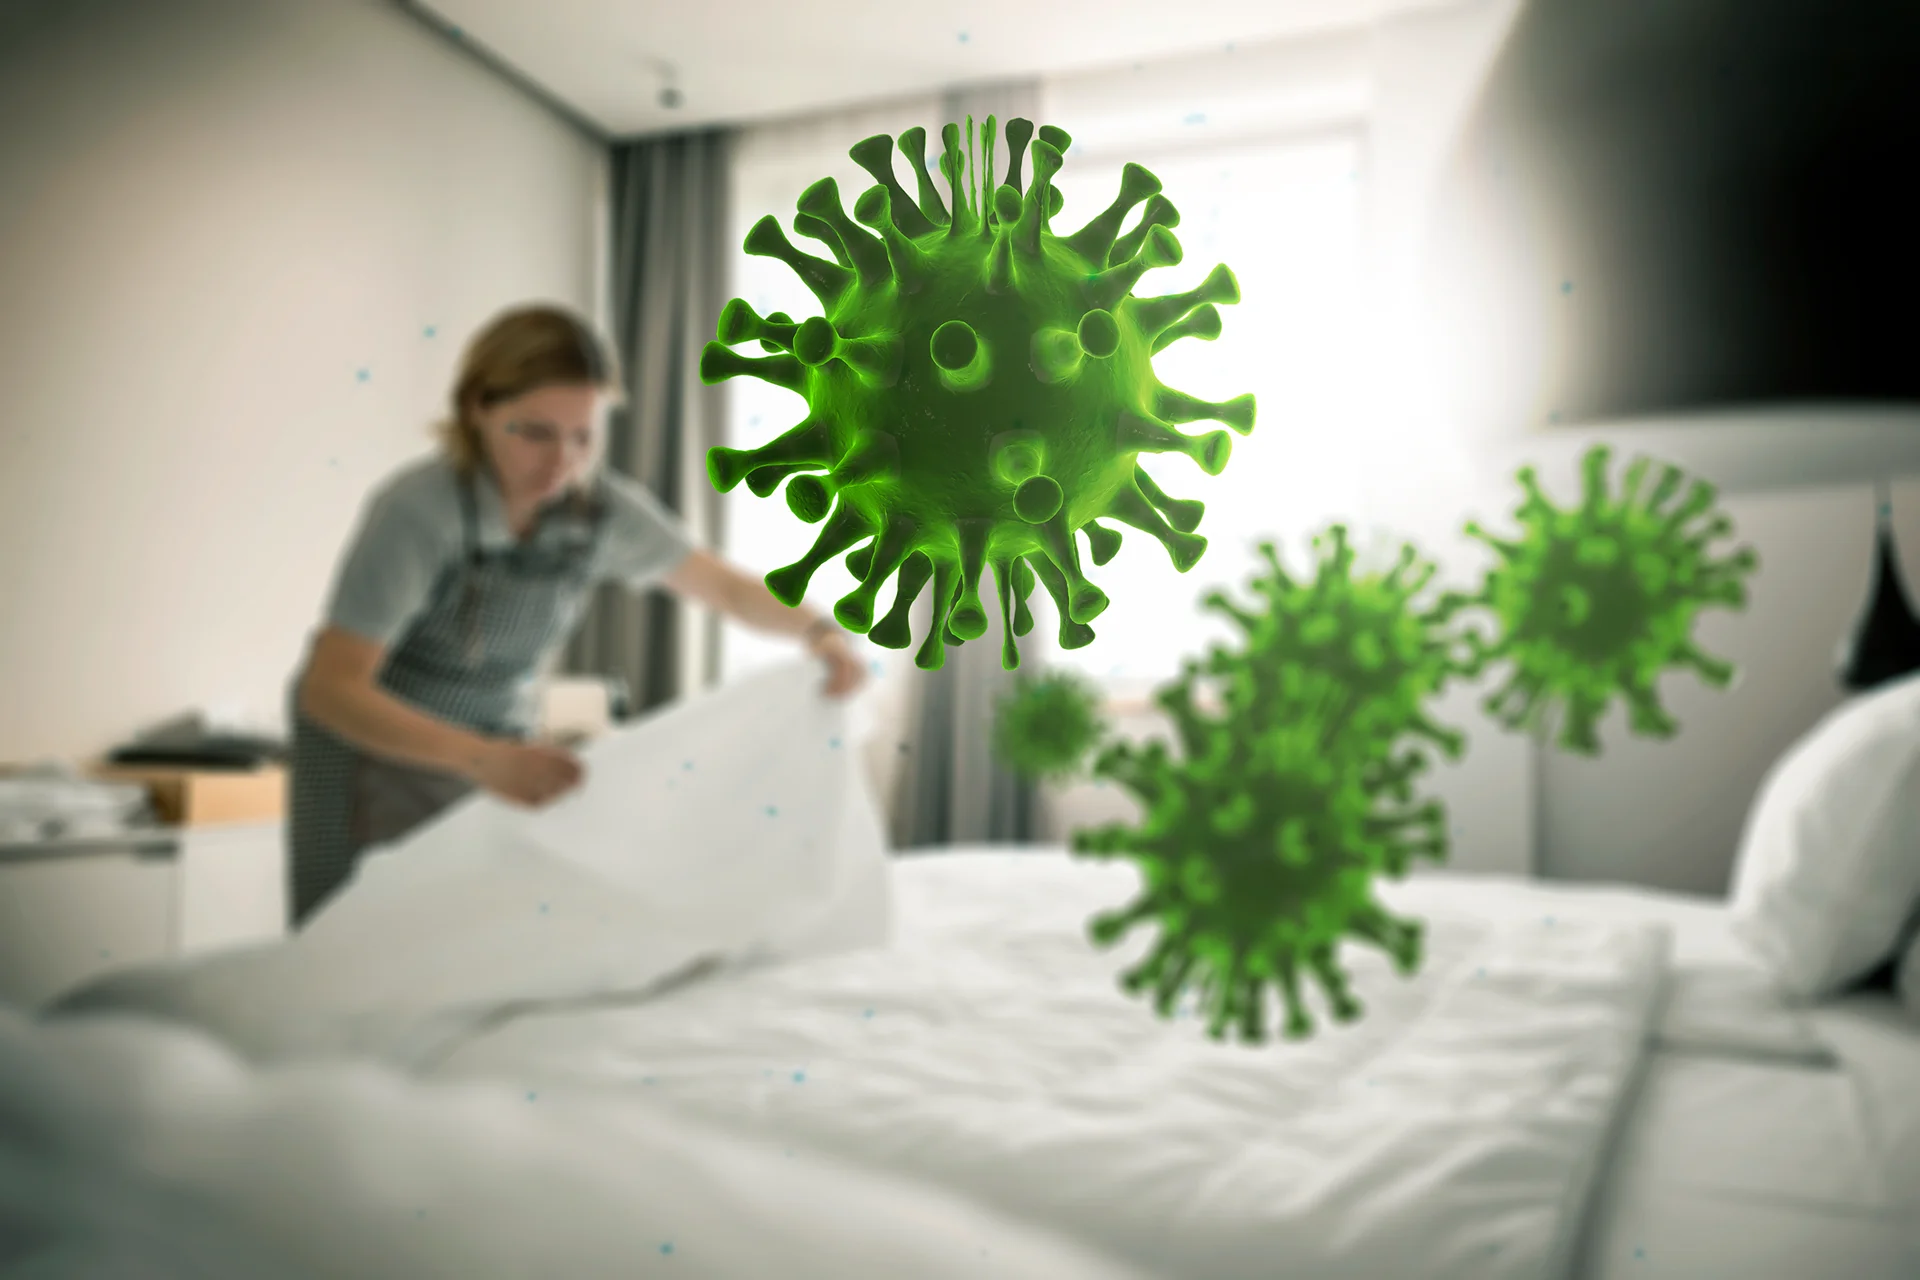 virus cells invaded a home